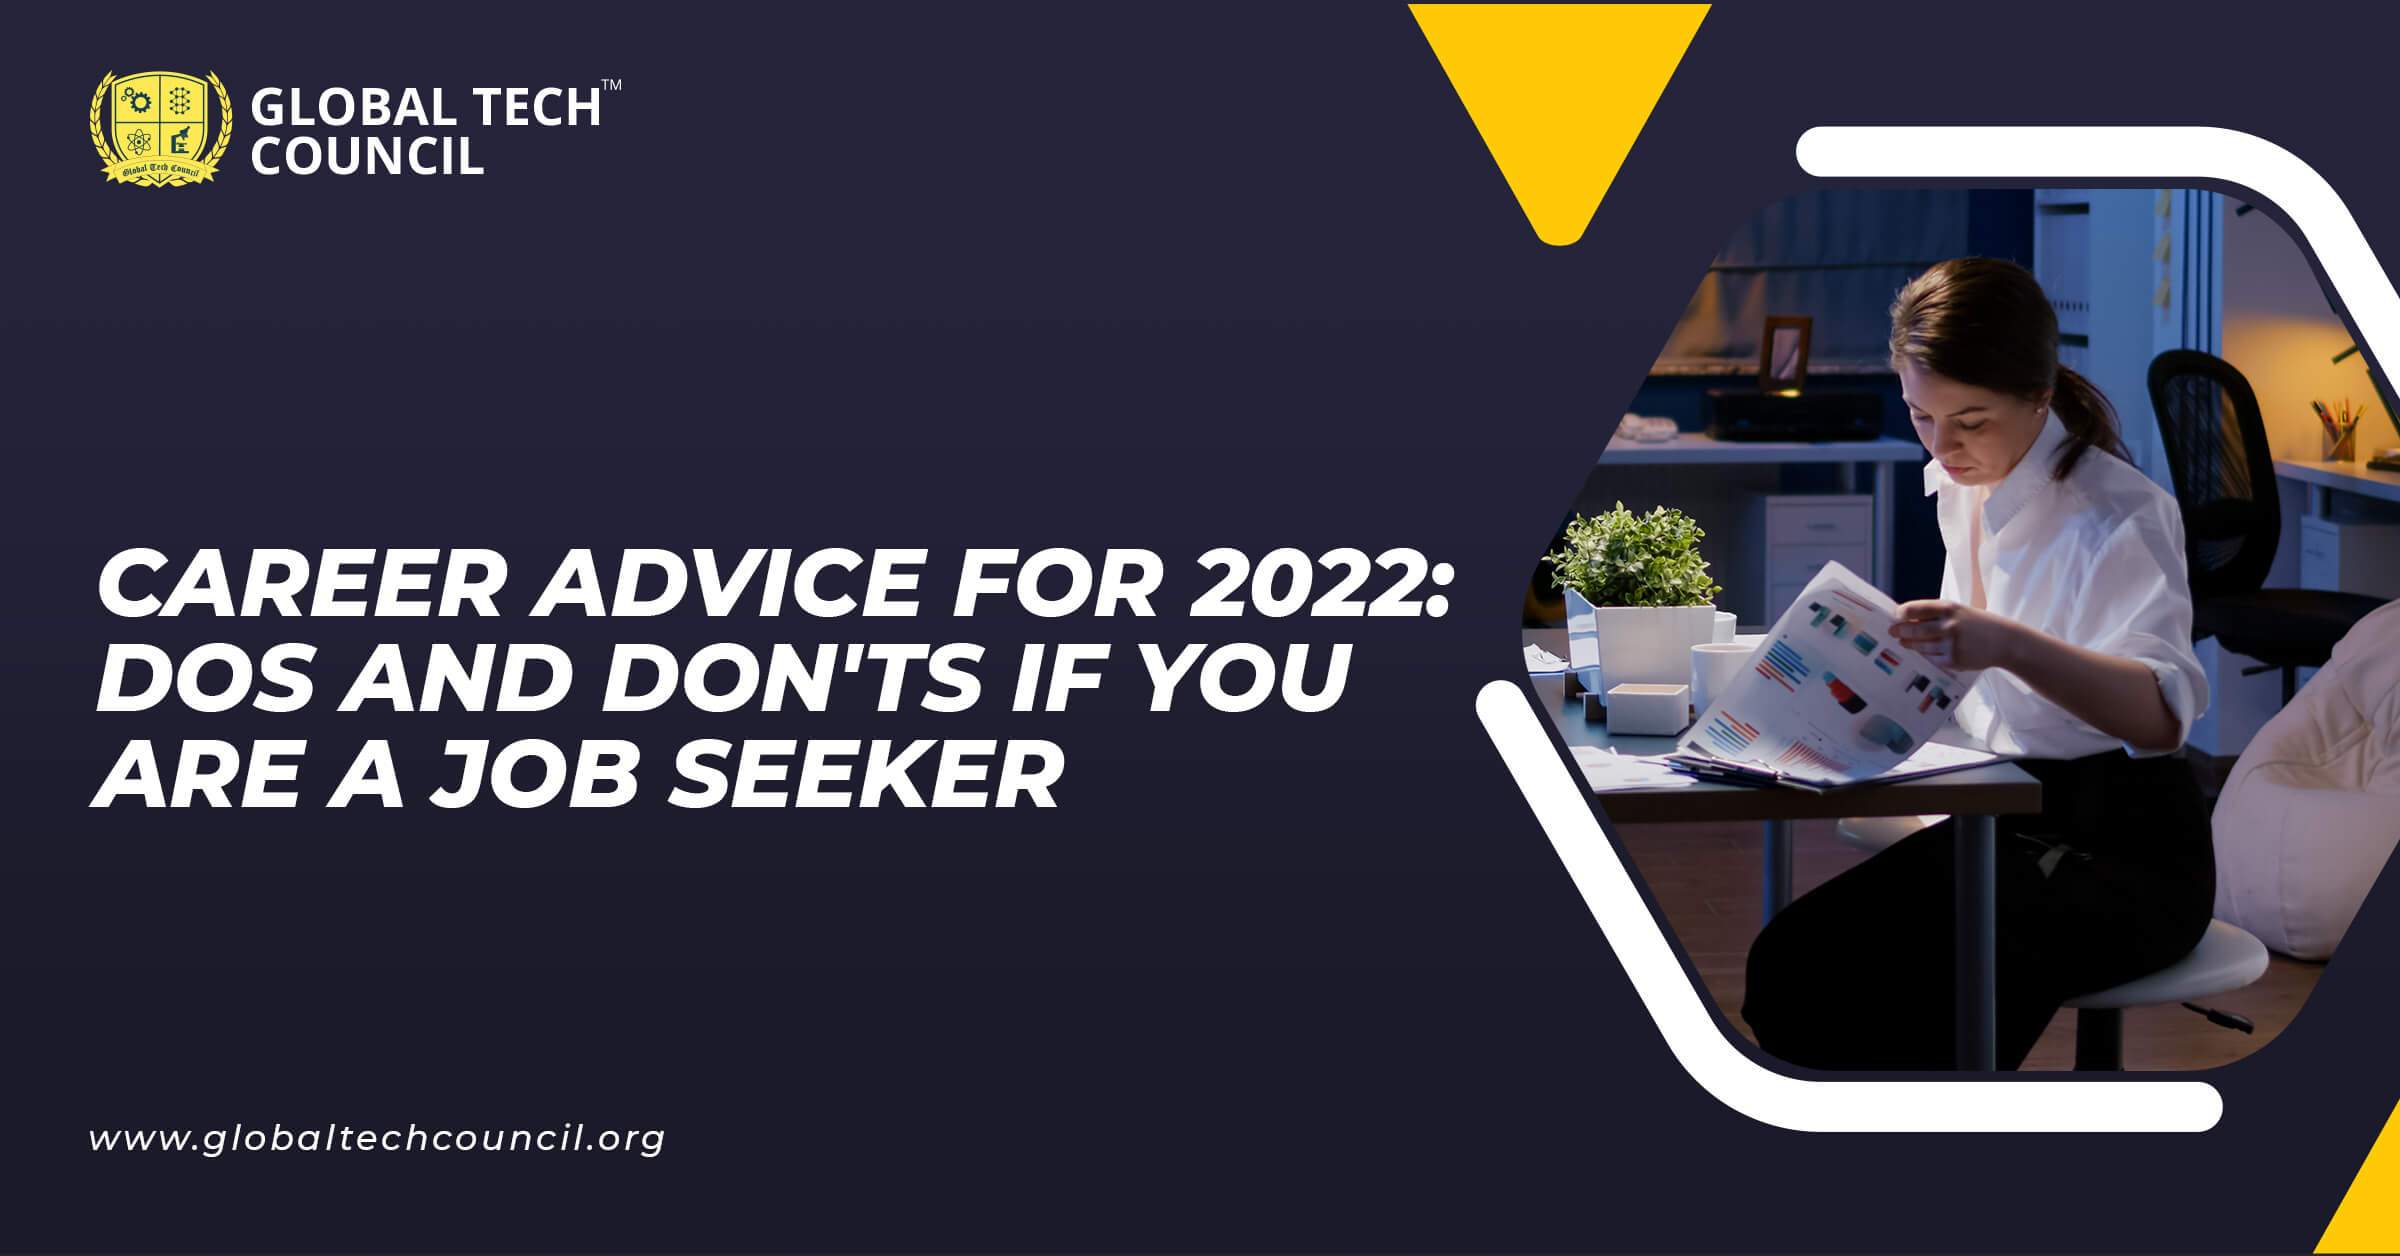 Career advice for 2022 Dos and don'ts if you are a job Seeker